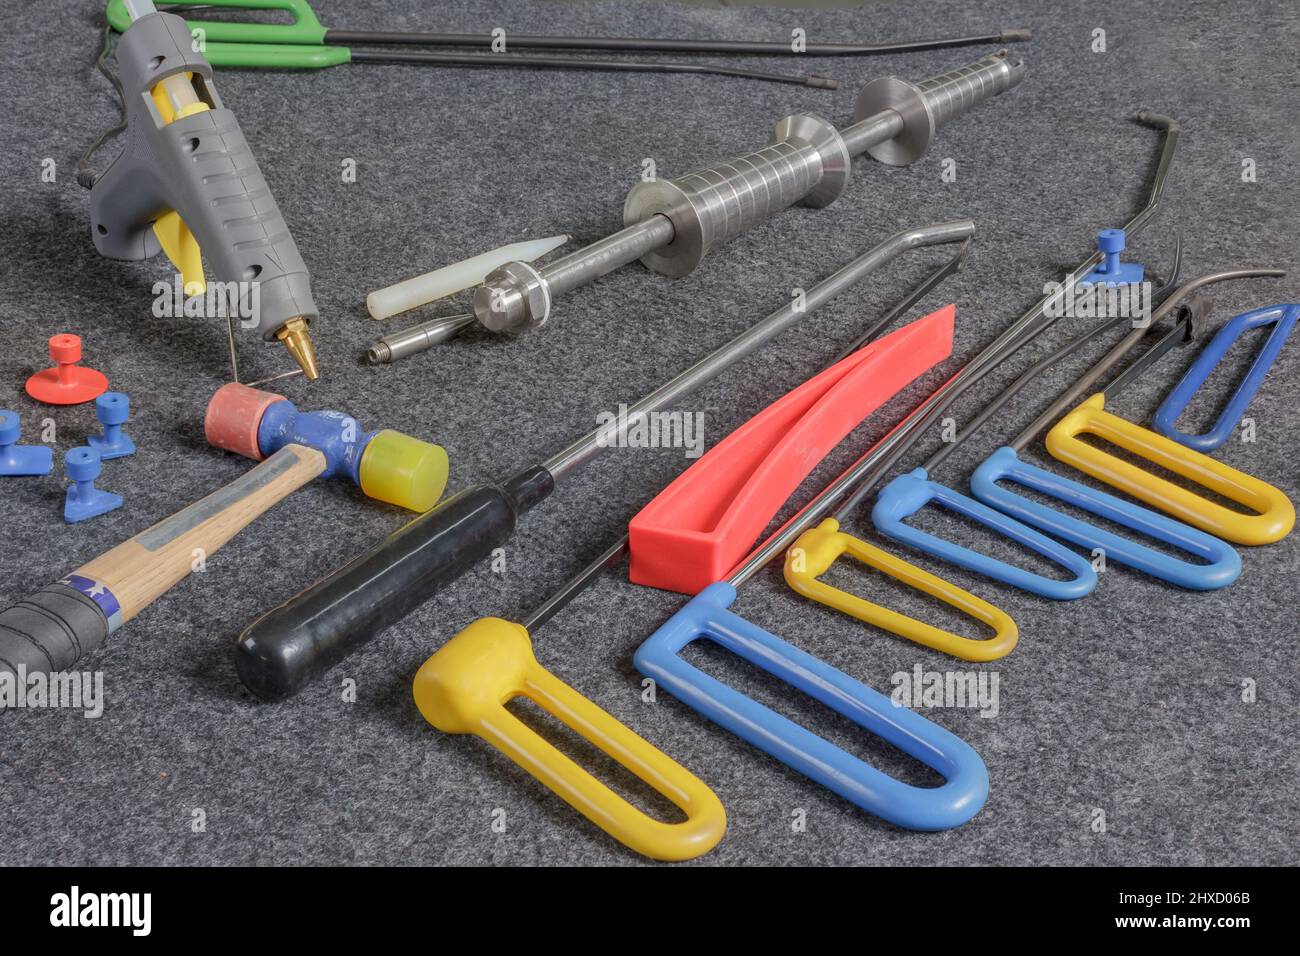 Paintless Dent Repair Kit Tools Set On The Work Table. Tools For Repair Dents On Car Body. Stock Photo